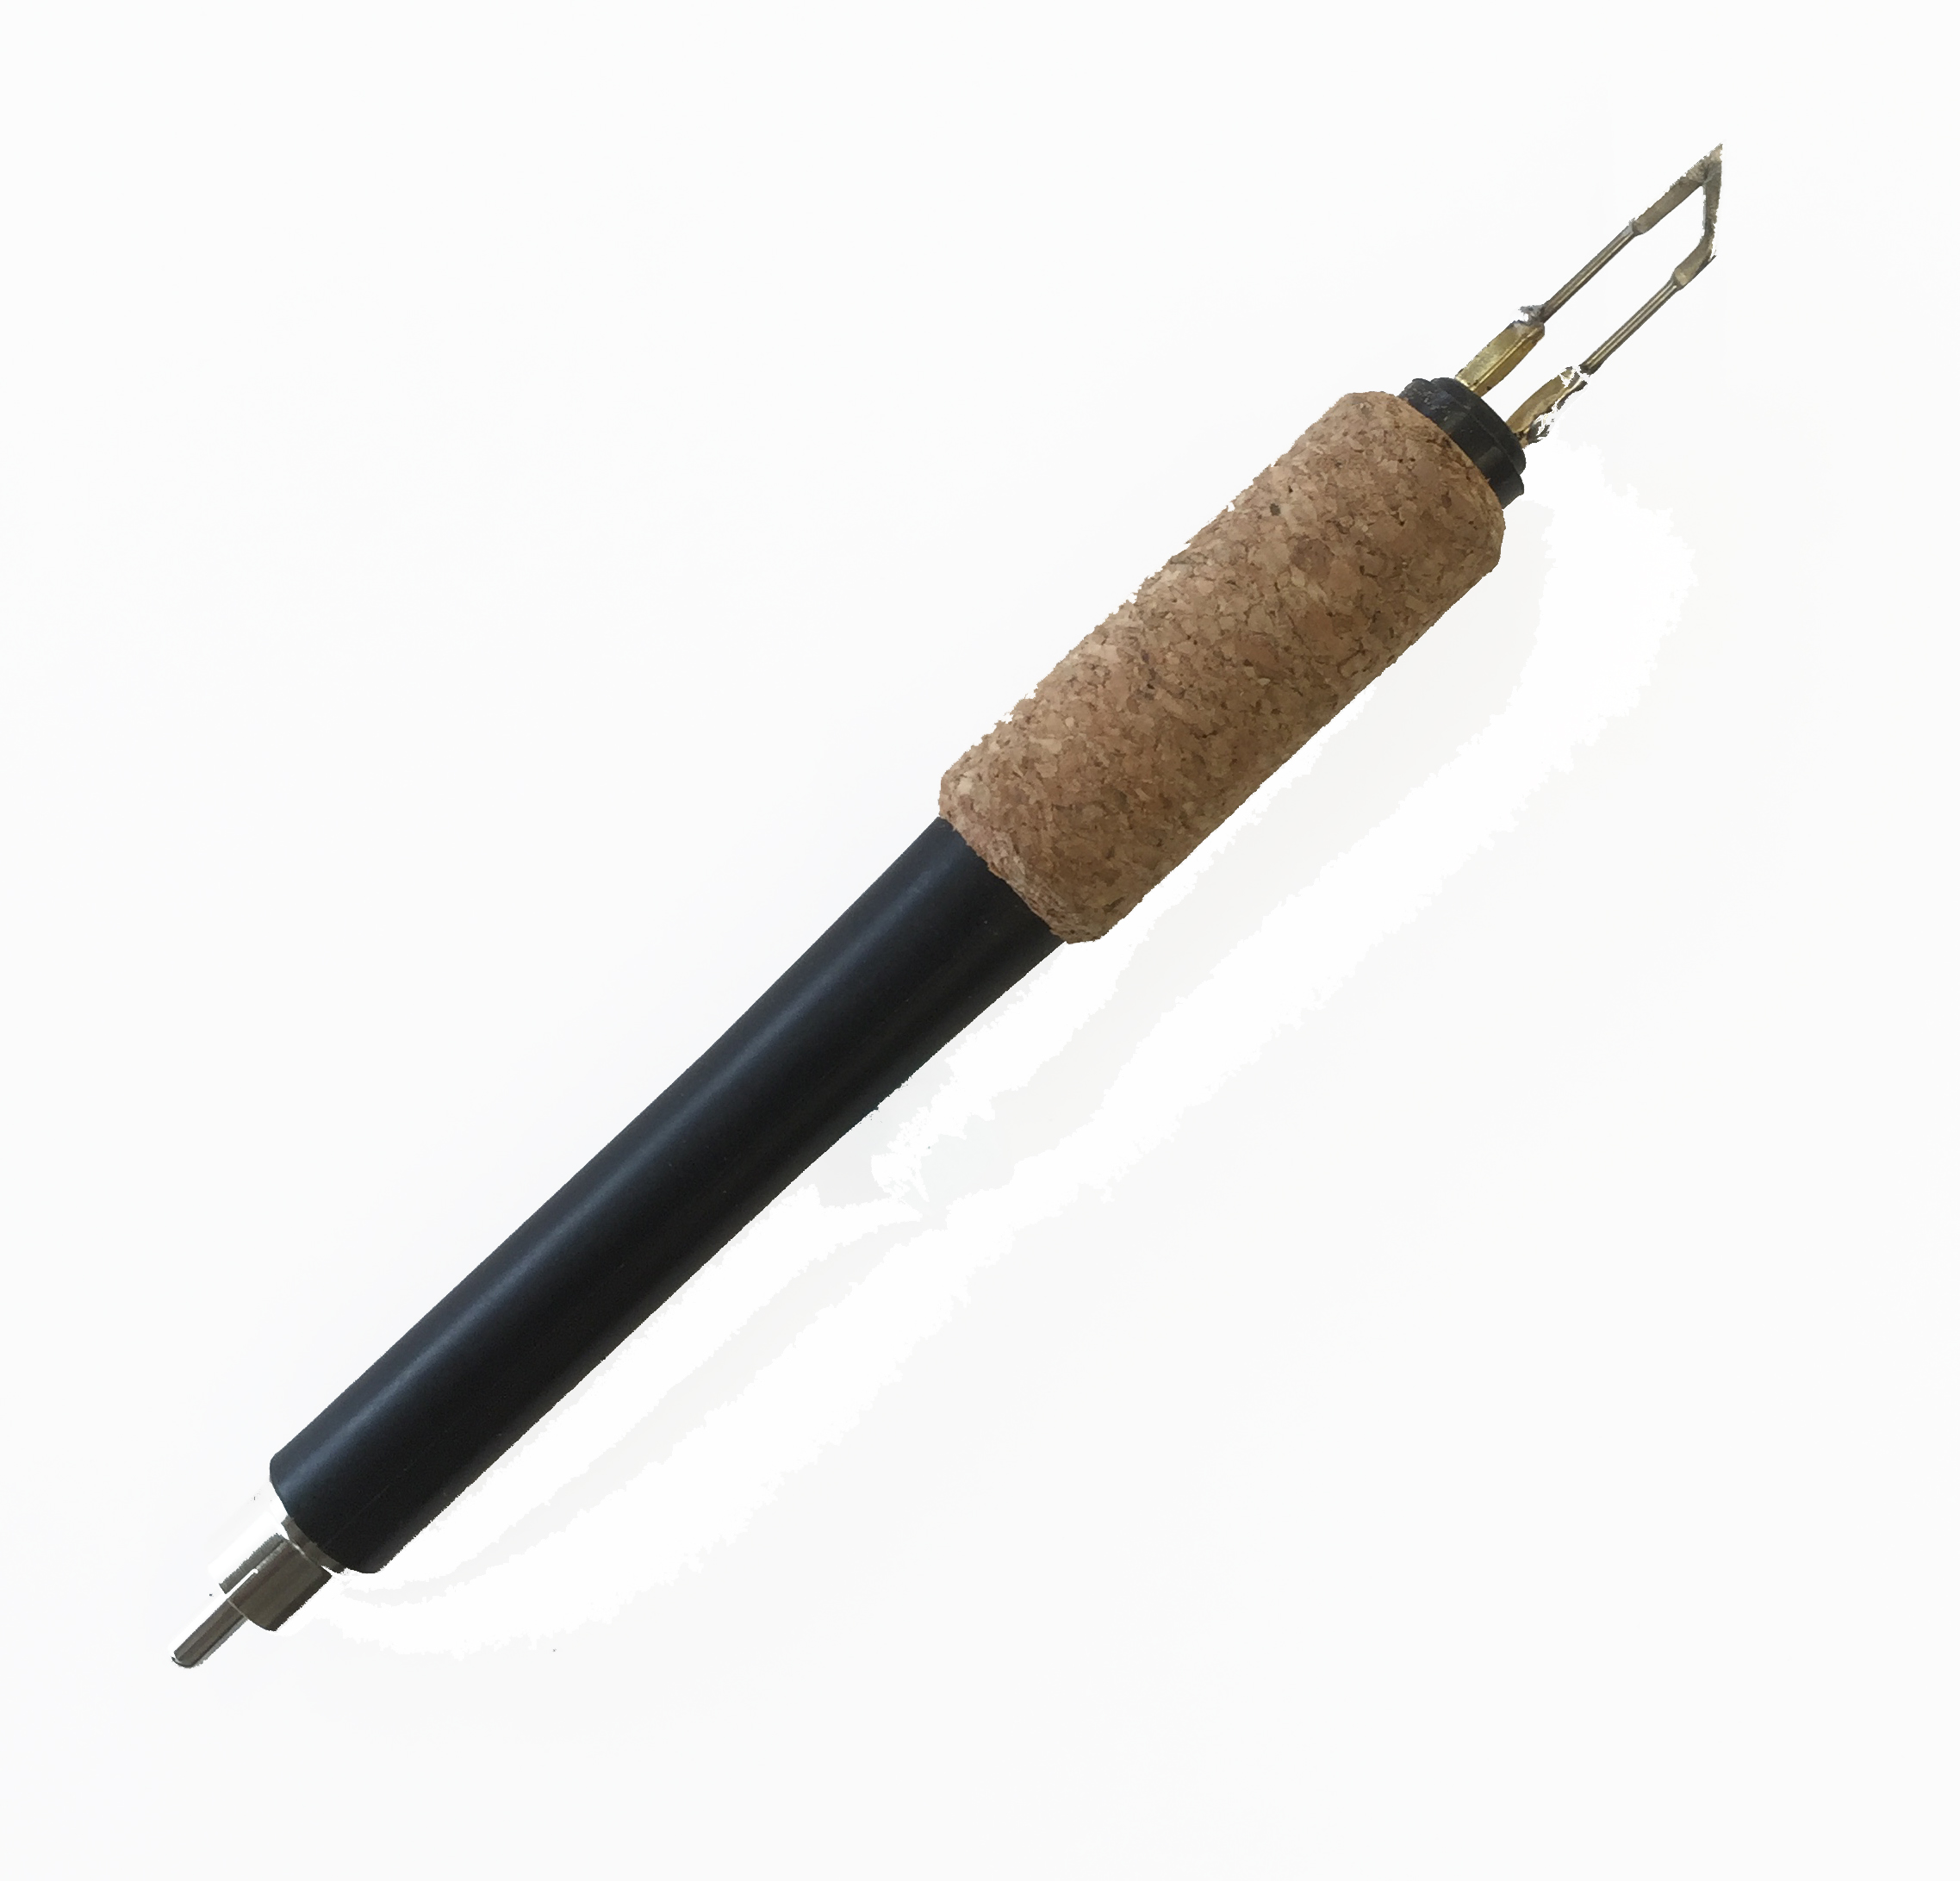 Colwood Small Heavy Shader Wood Burning Pen